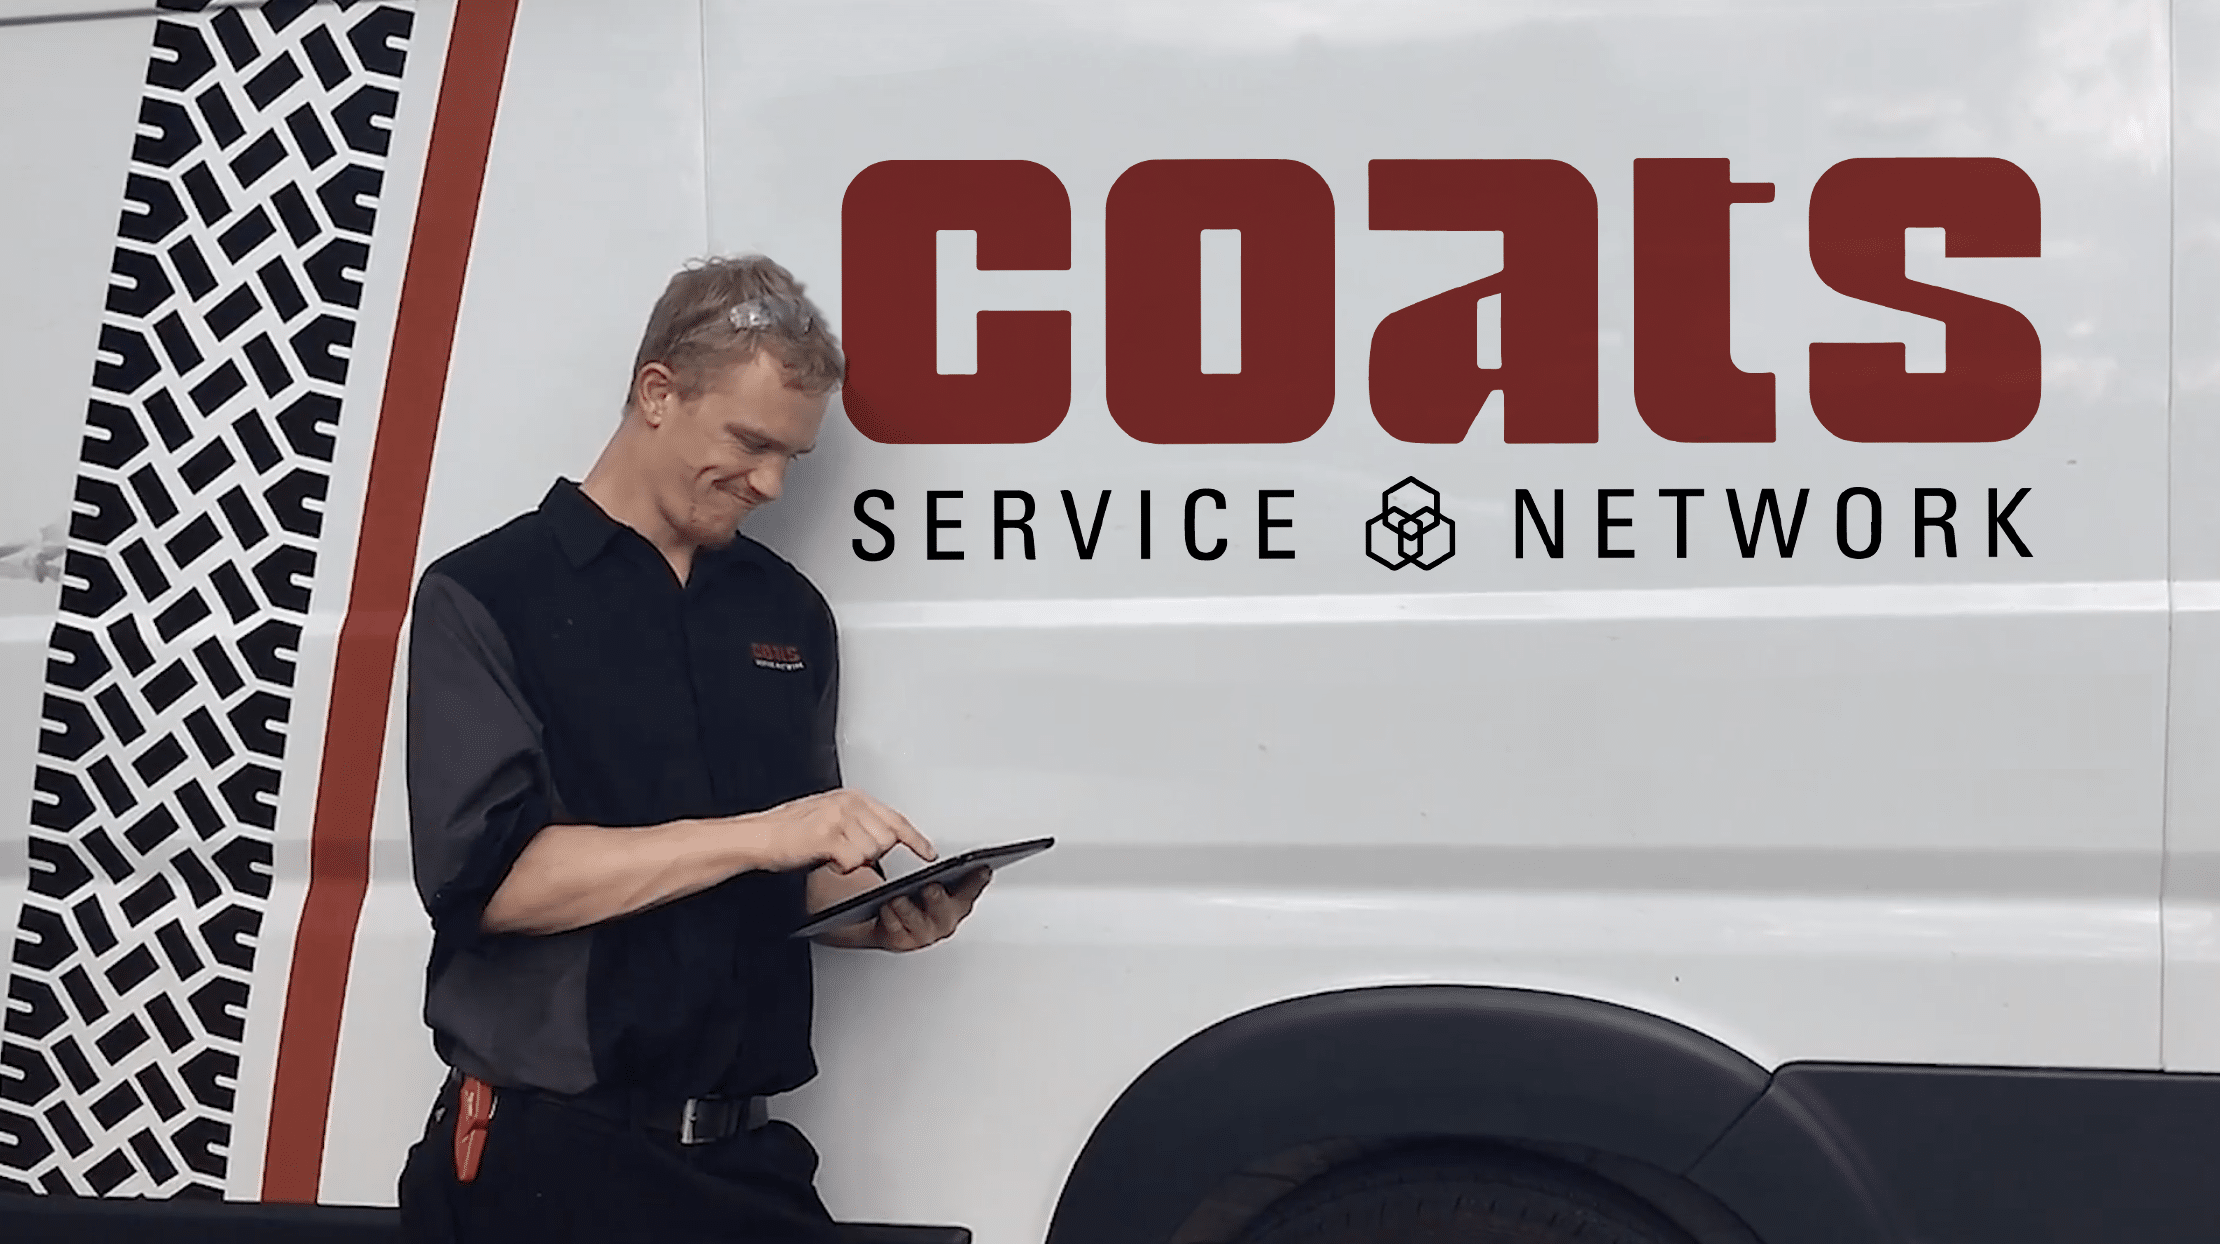 A Coats service technicians manages his customers service requests on an ipad while leaning against a service van that says Coats Service Network